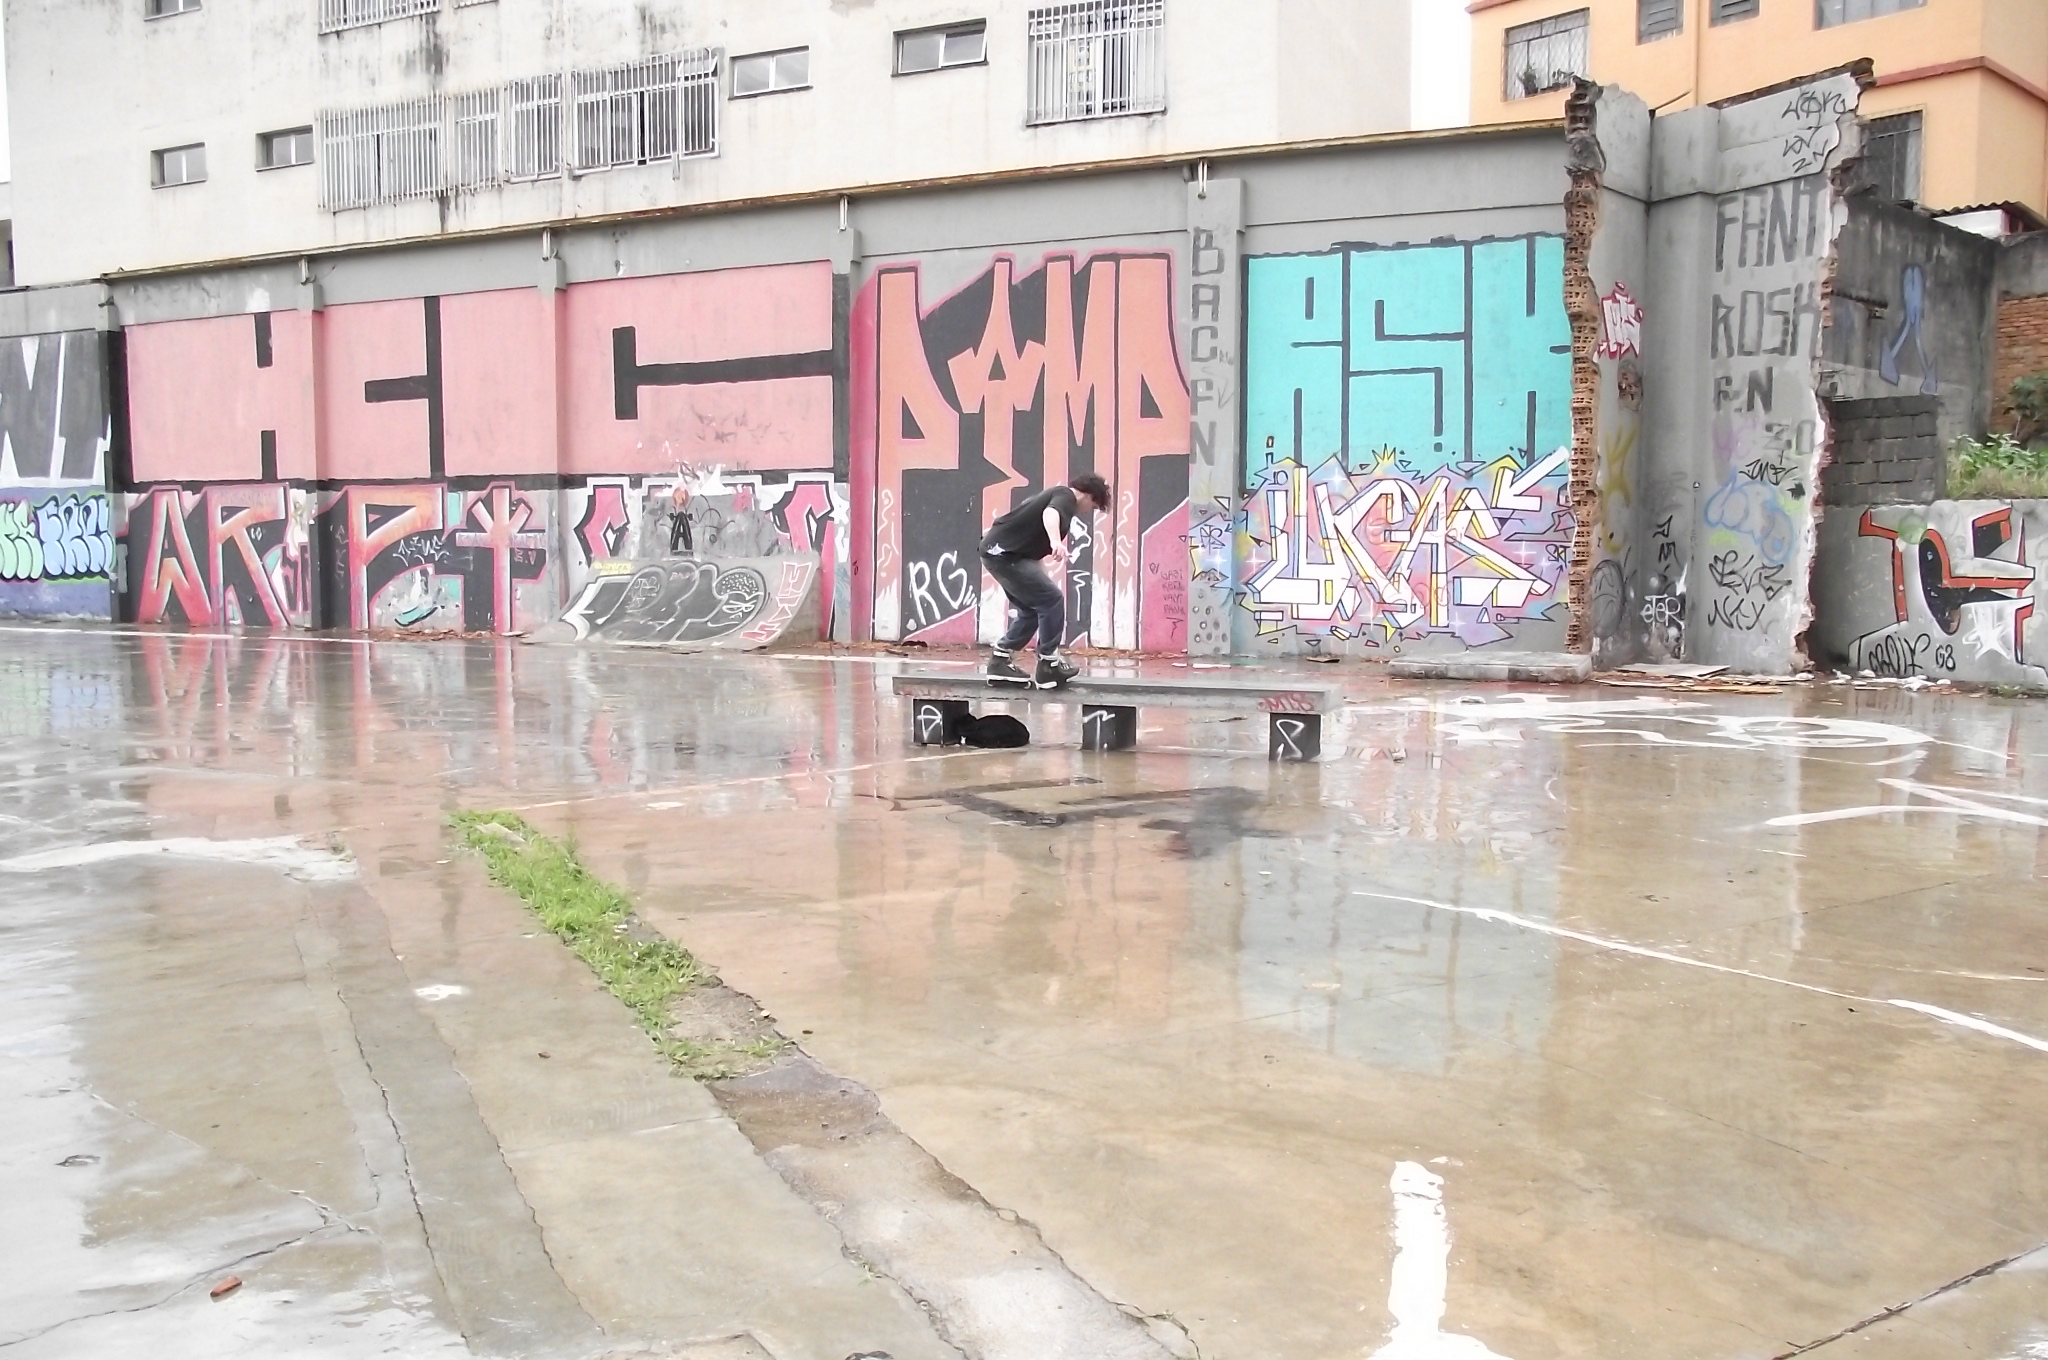 skateboarders skating on a wet concrete parking lot